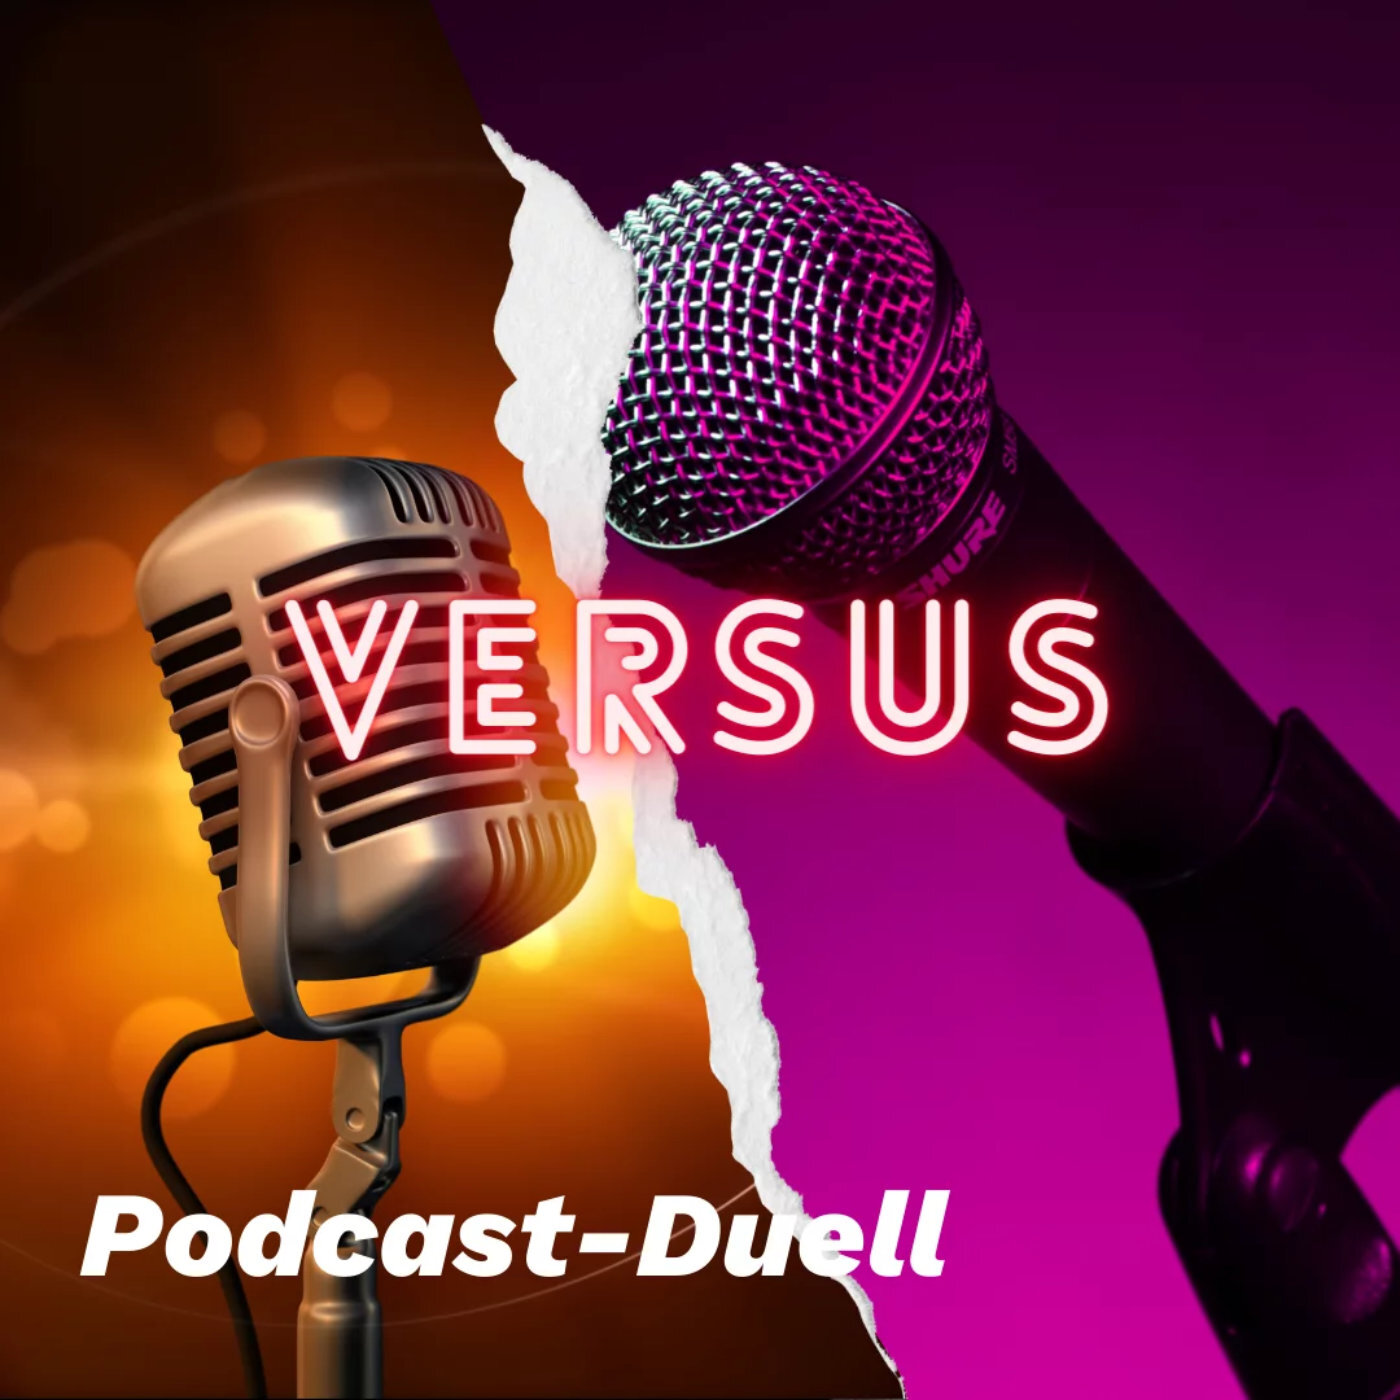 Podcast-Duell-ohne.jpg